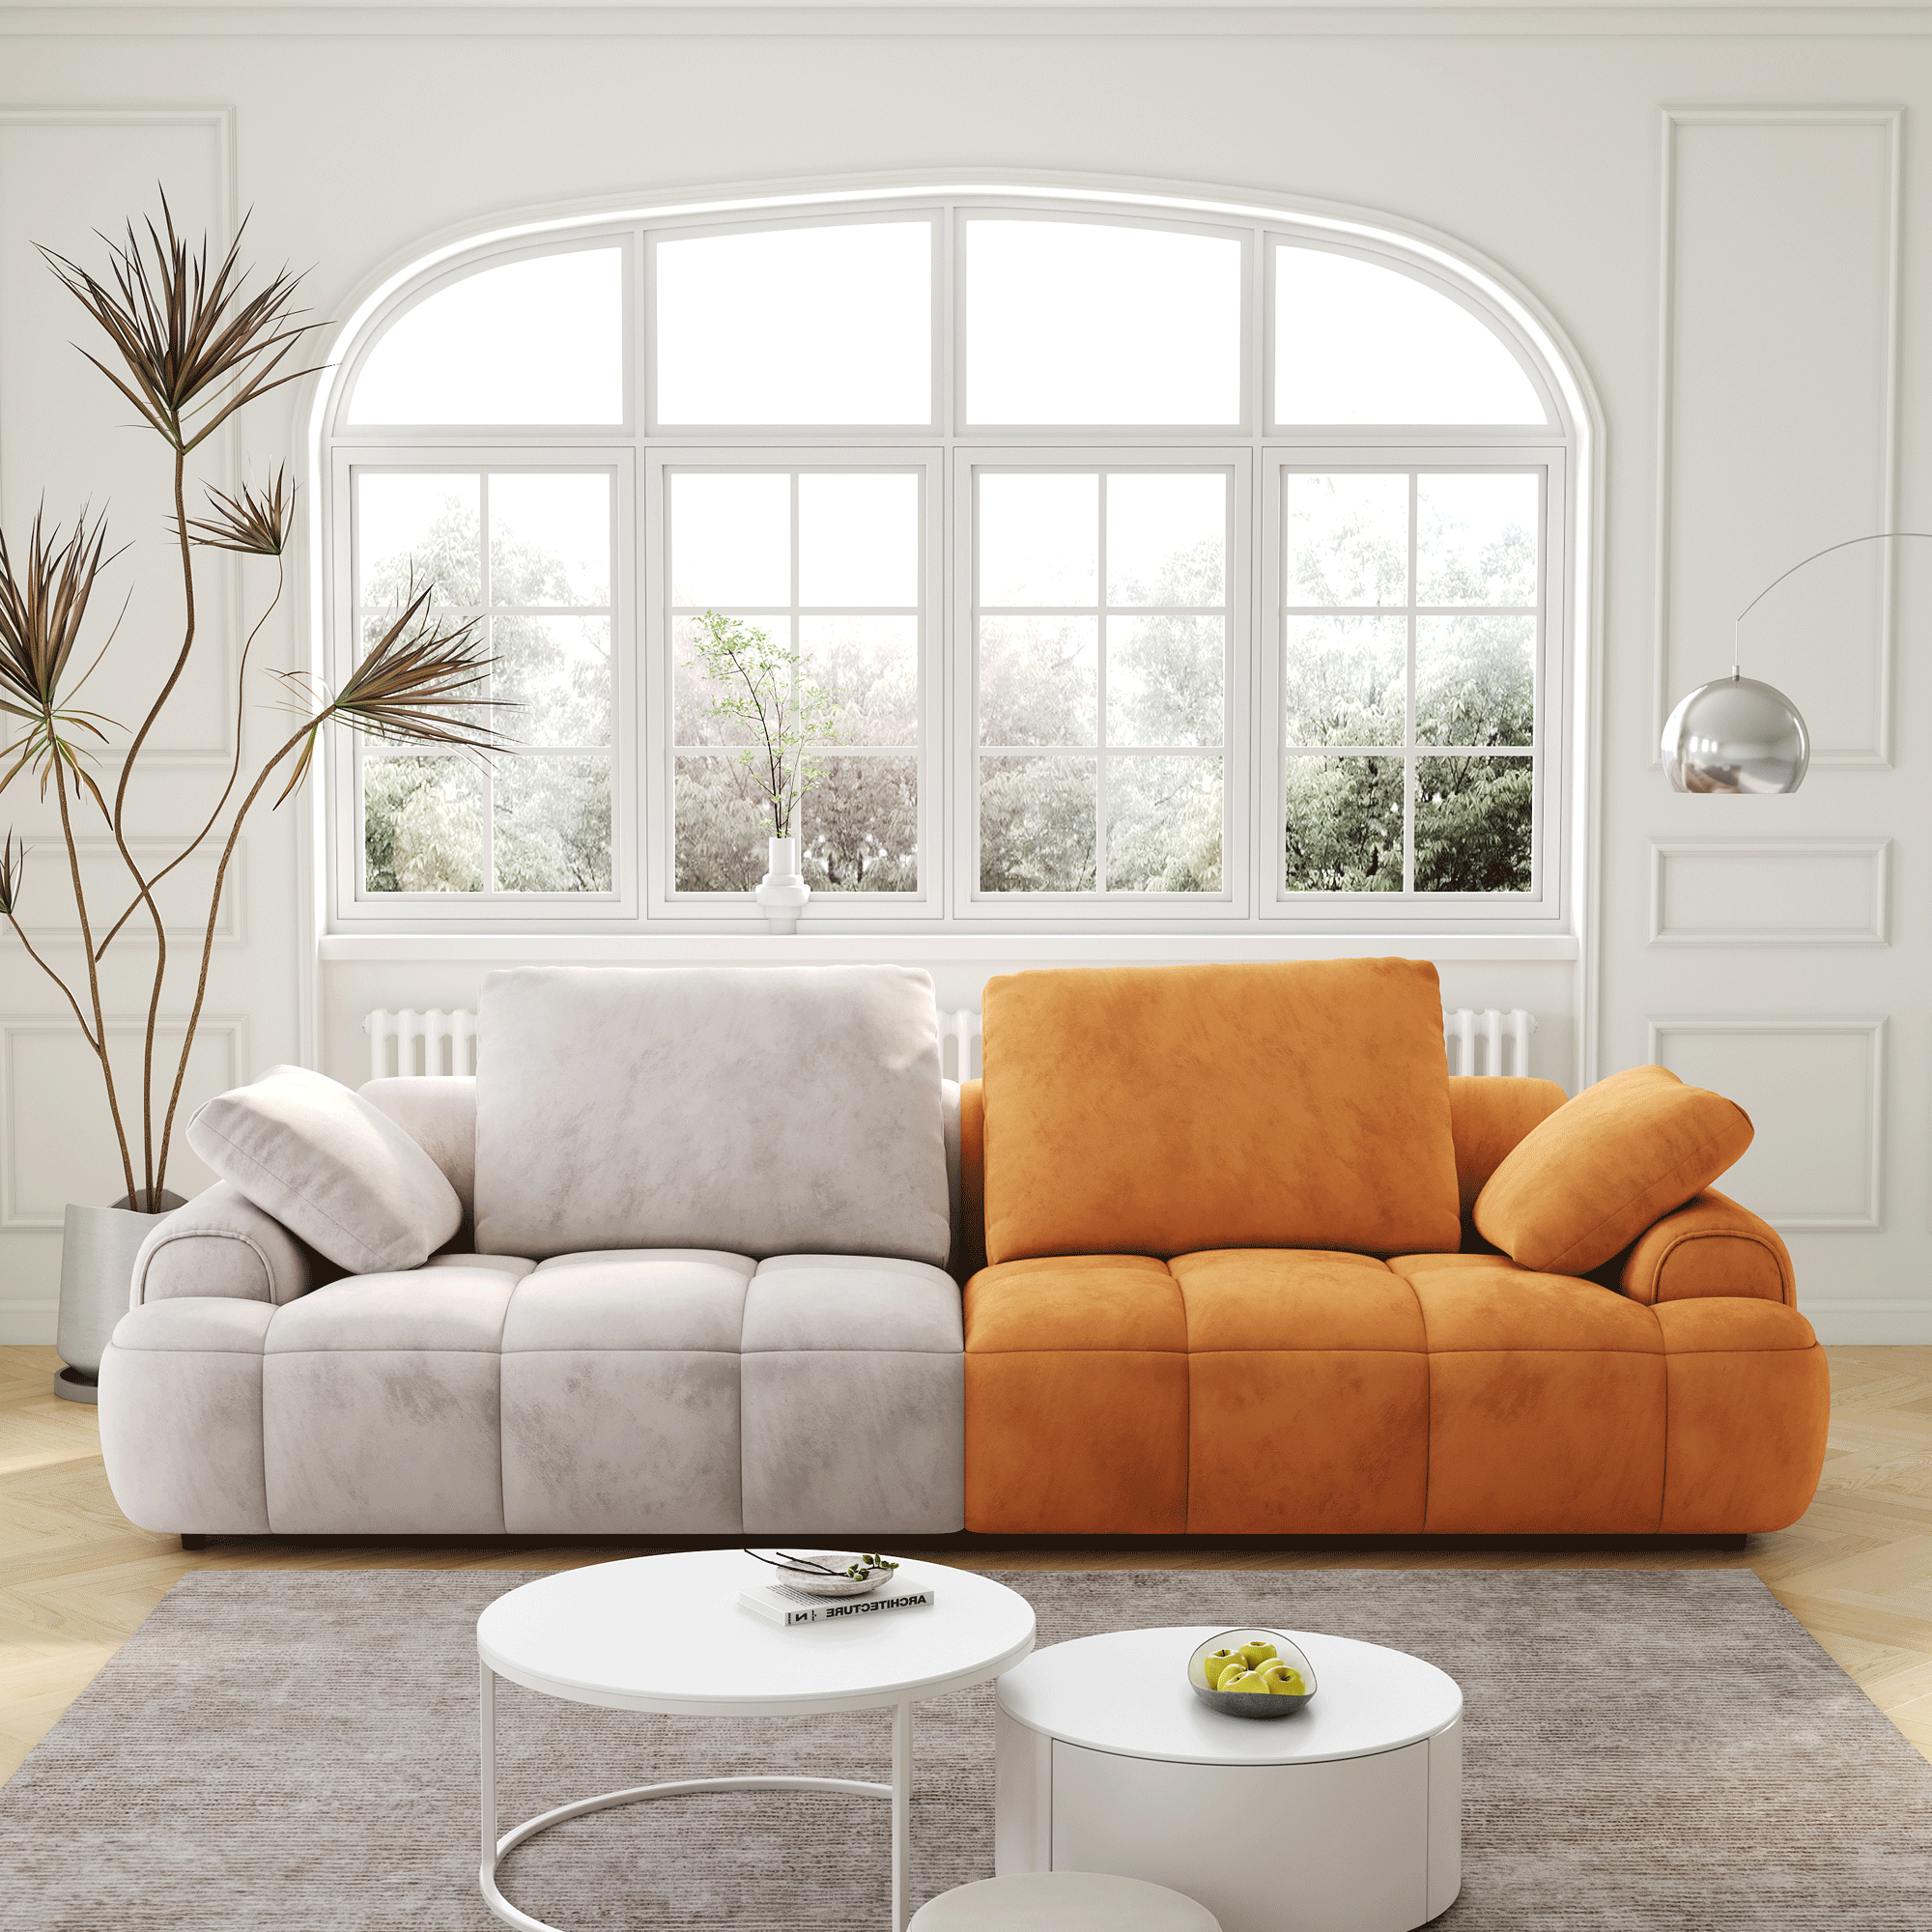 Large size two Seat Sofa, Modern Upholstered, Beige paired with yellow suede fabric